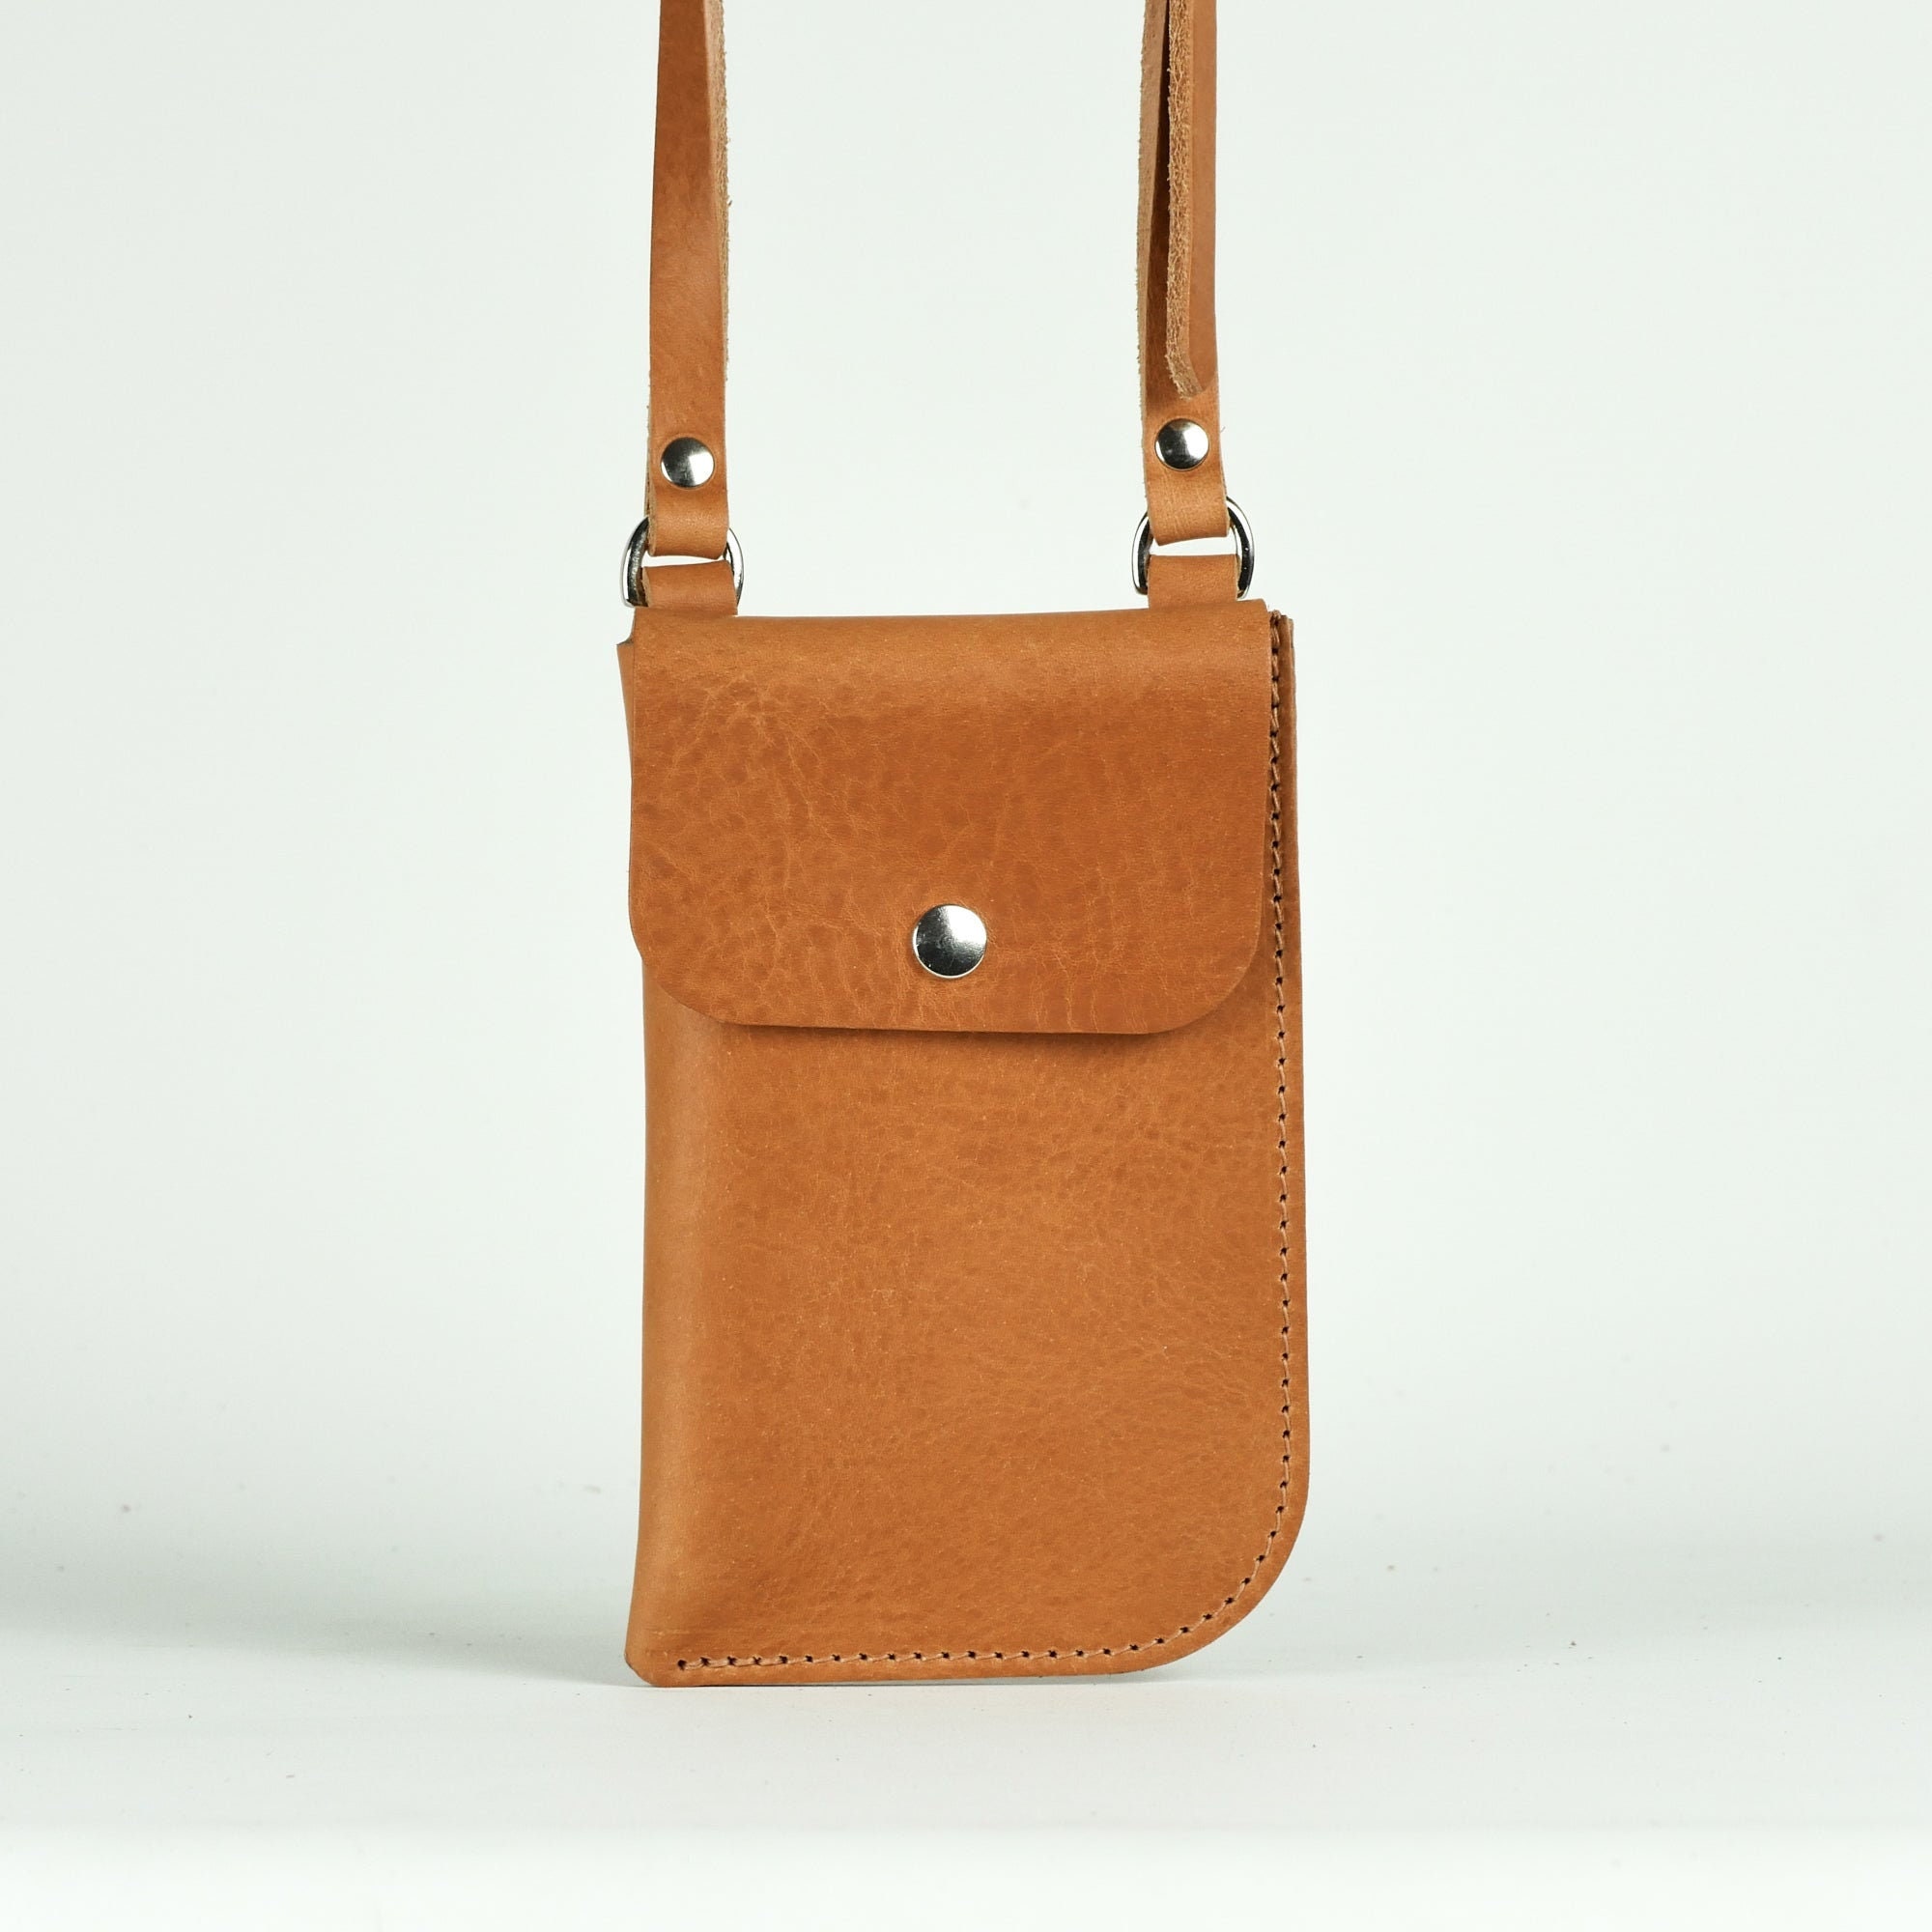 Tan Leather Sling Bag | Handmade Leather Neck Pouch | Leather Phone Pouch | Vegetable Tanned Neck Phone Bag